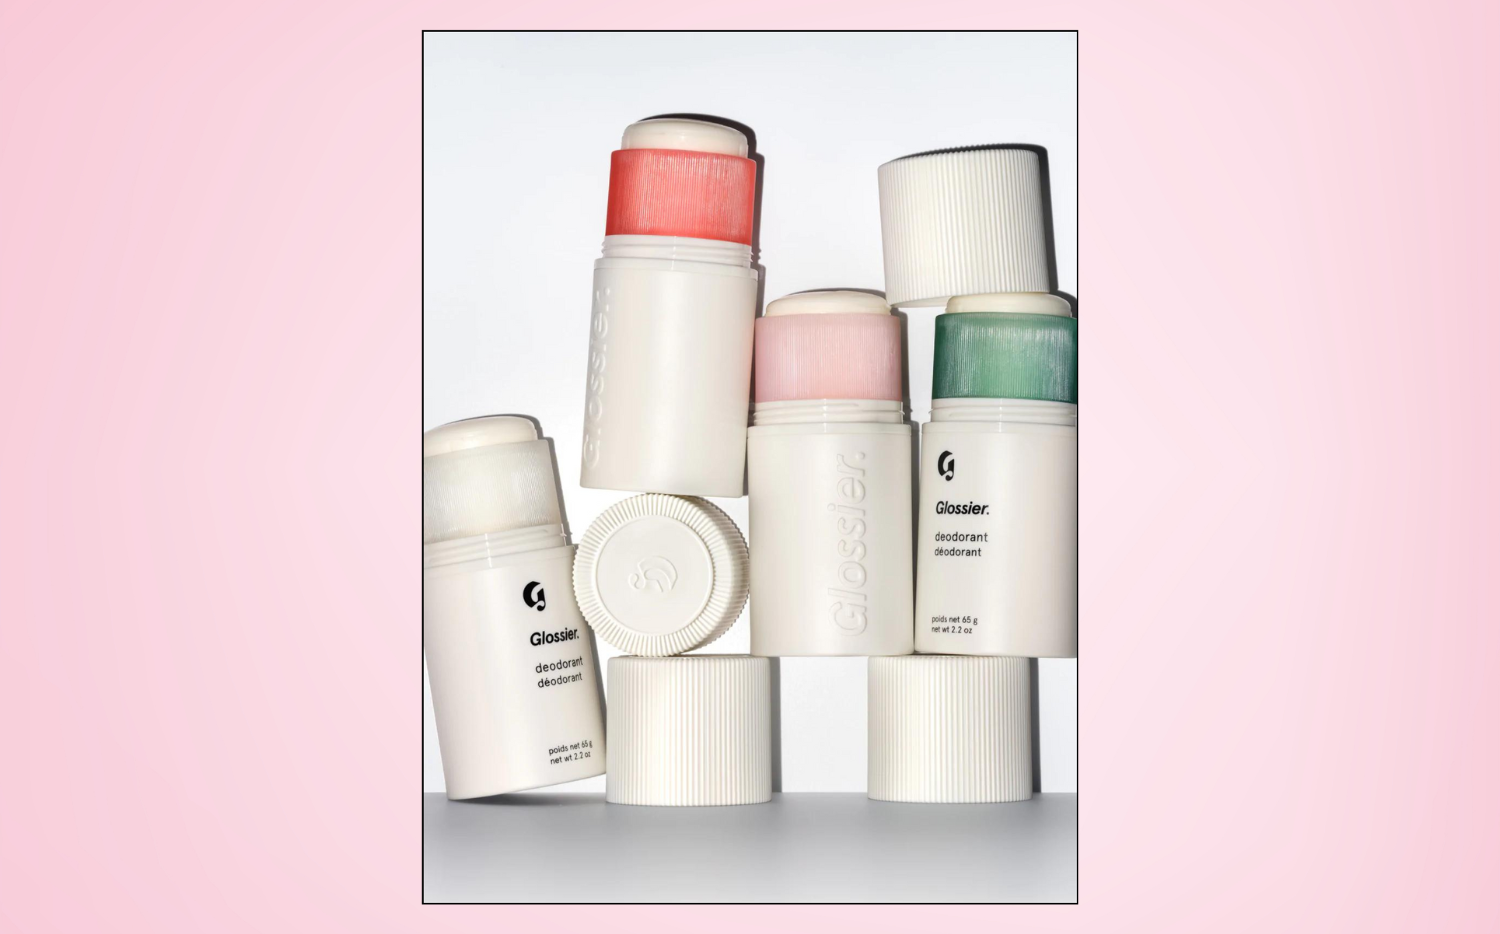 I Tried Glossier Deodorant for a Month. Will I Keep Using It? - Blogilates